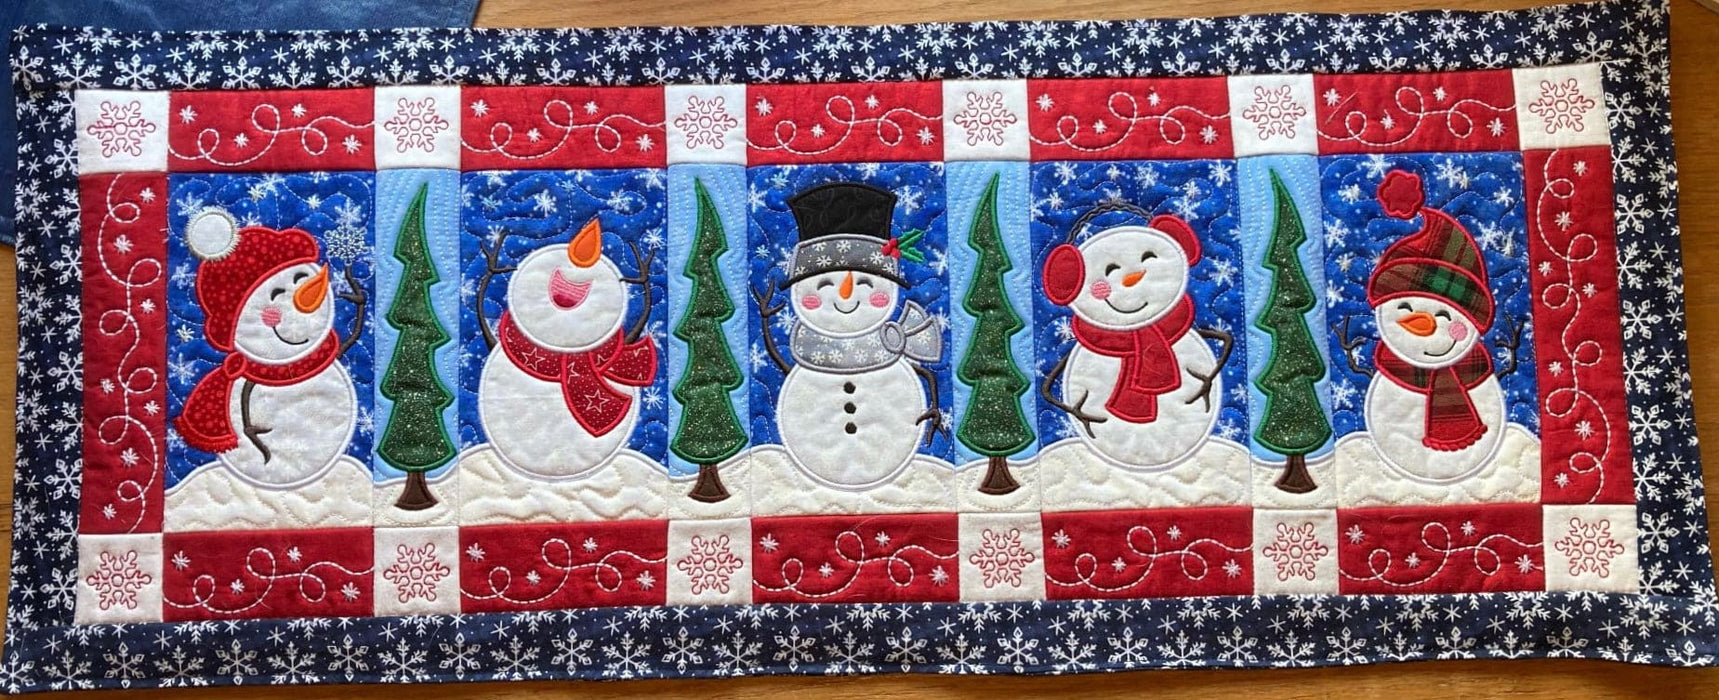 Snowman Table Runner Kit - Fabric KIT - Machine Embroidery - Fabric Only